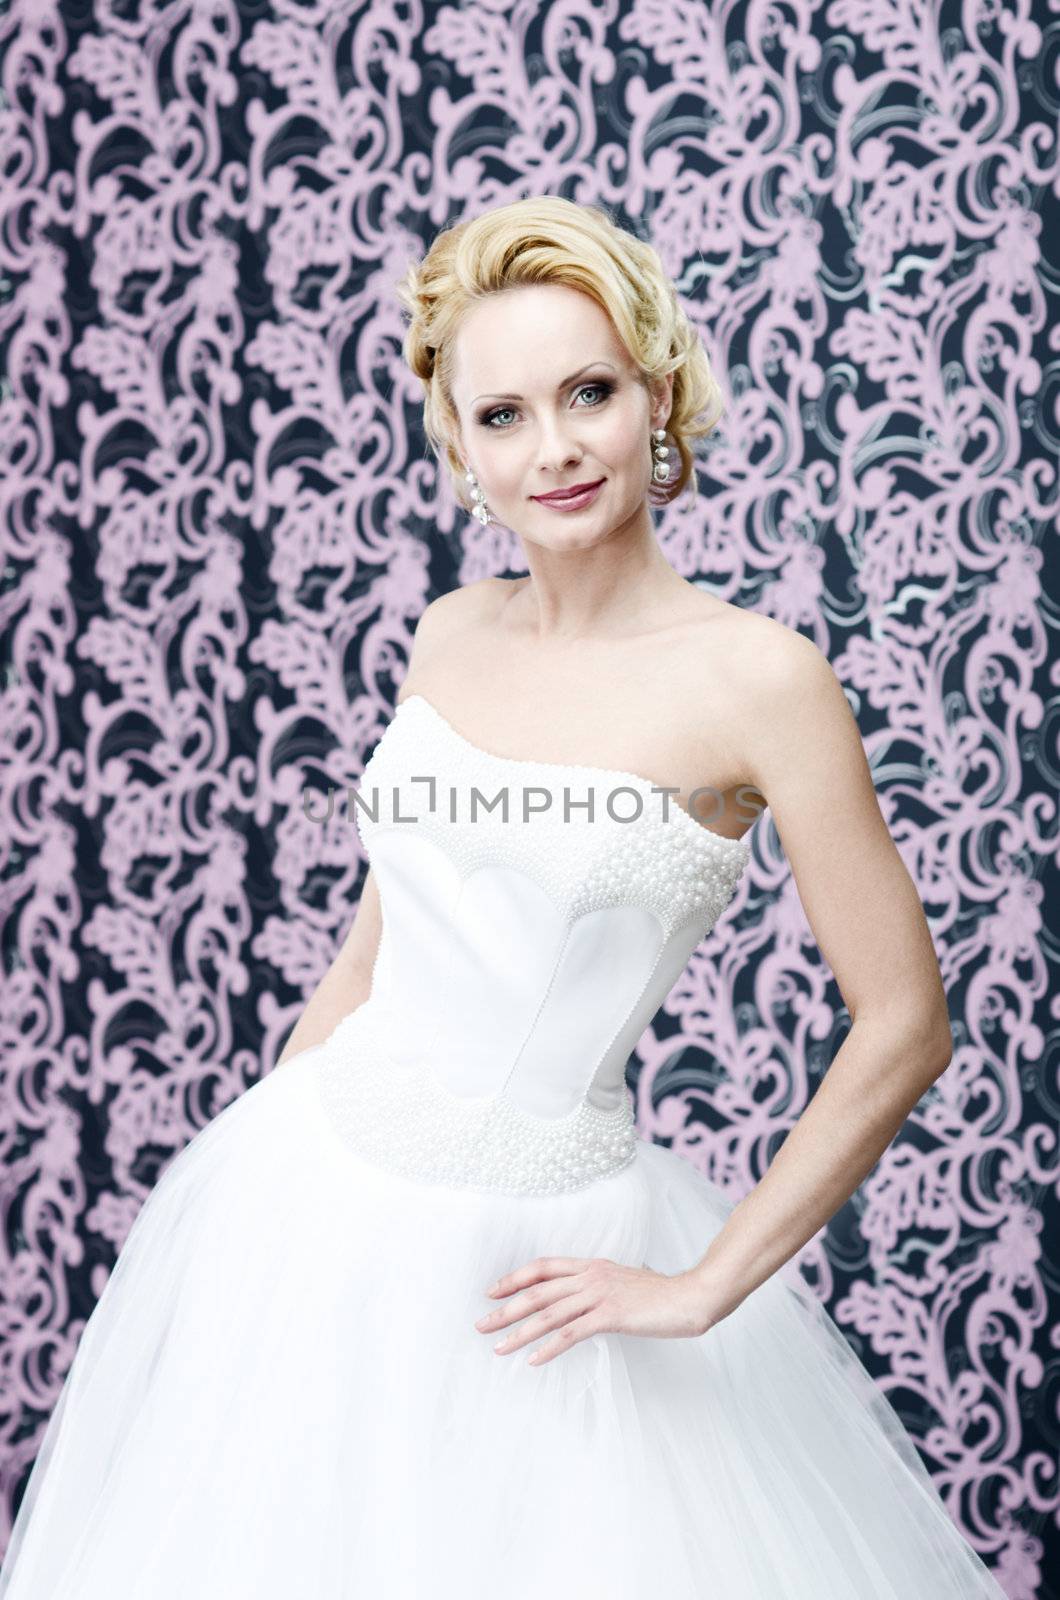 20s yeared blonde bride posing in white wedding dress. She is slightly smiling